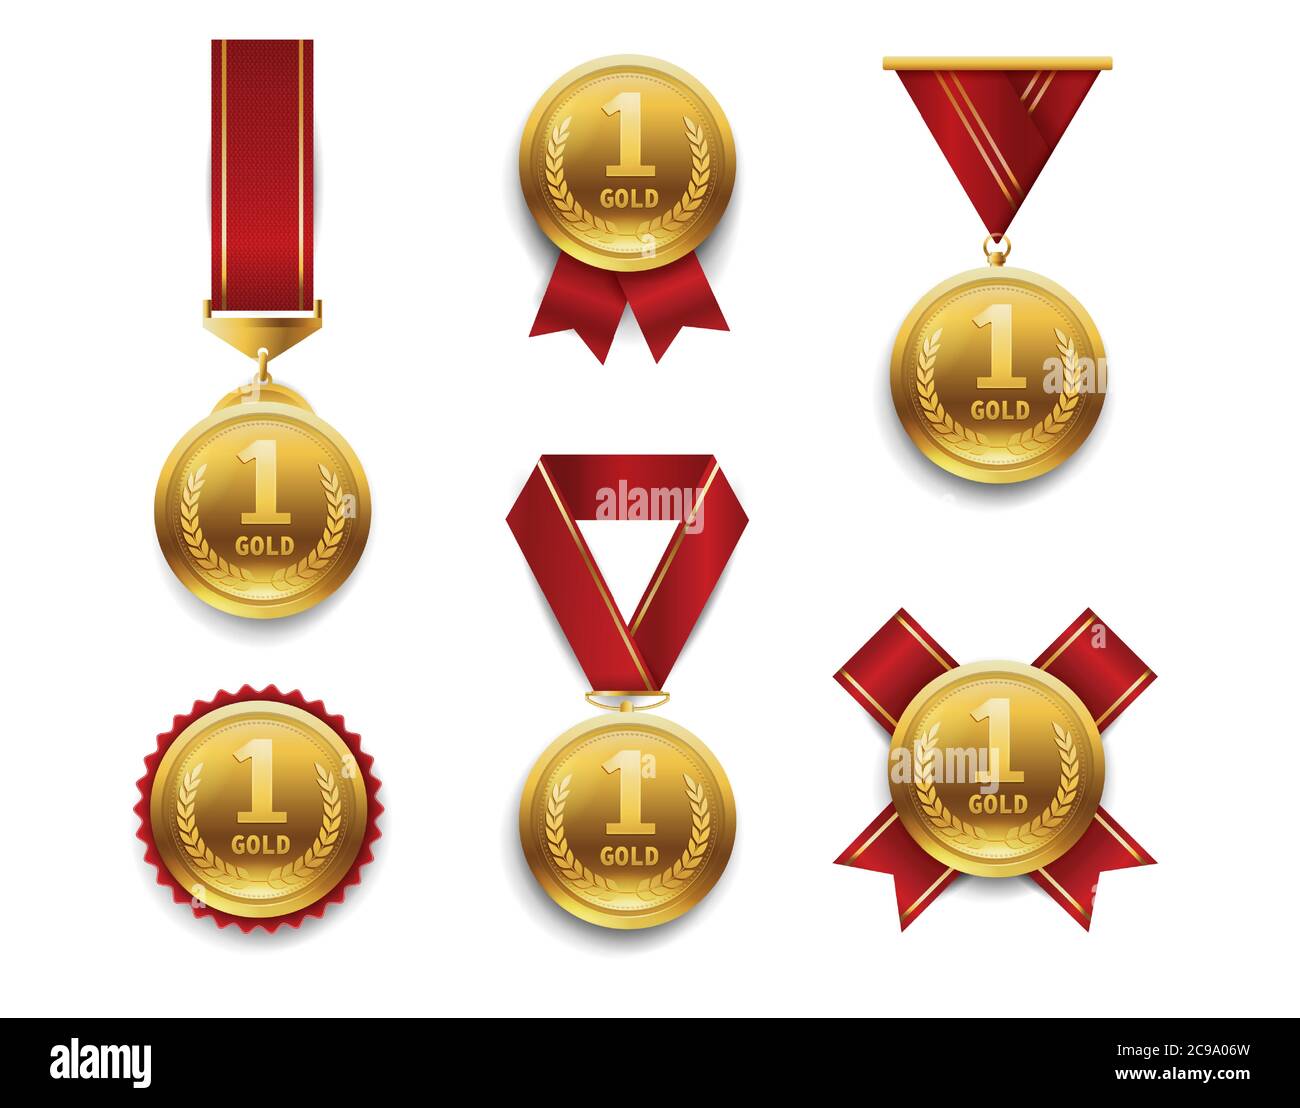 Gold medals set. Award winner trophy, 1st placement achievement. Round medal with different red ribbons. Realistic vector illustration isolated on Stock Vector